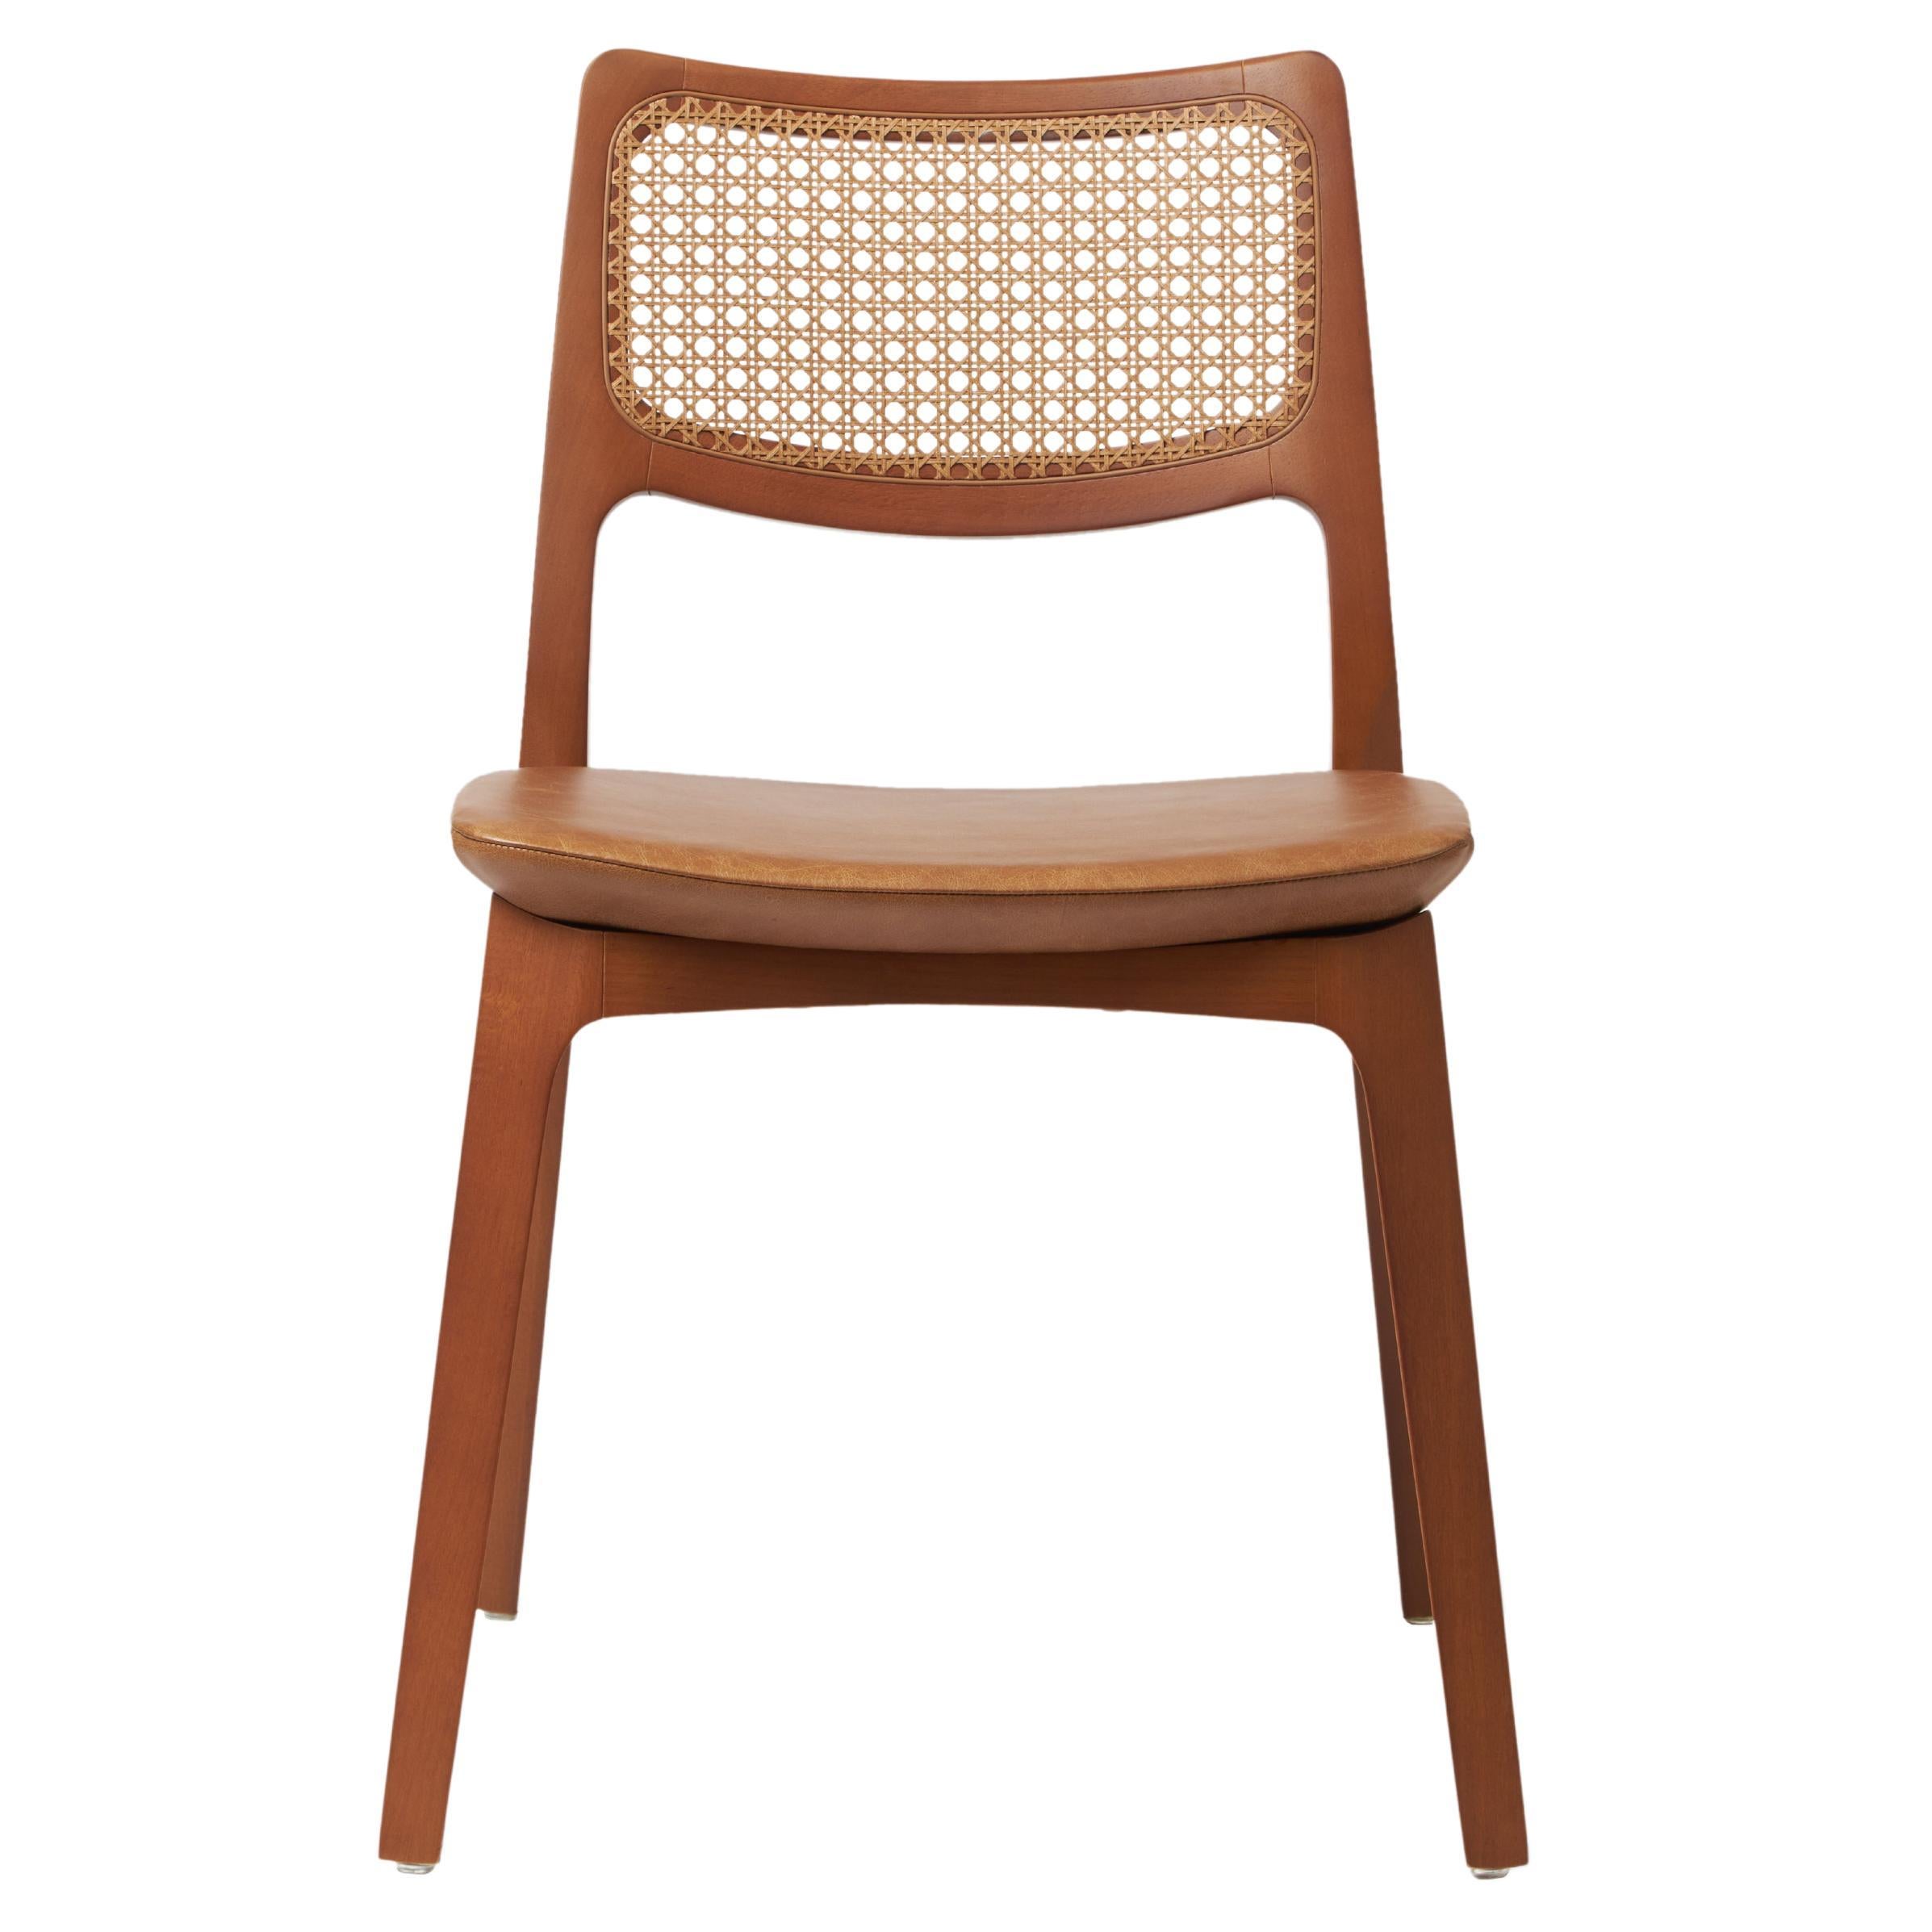 Modern Style Aurora Chair Sculpted in Walnut Finish No Arms, leather seating